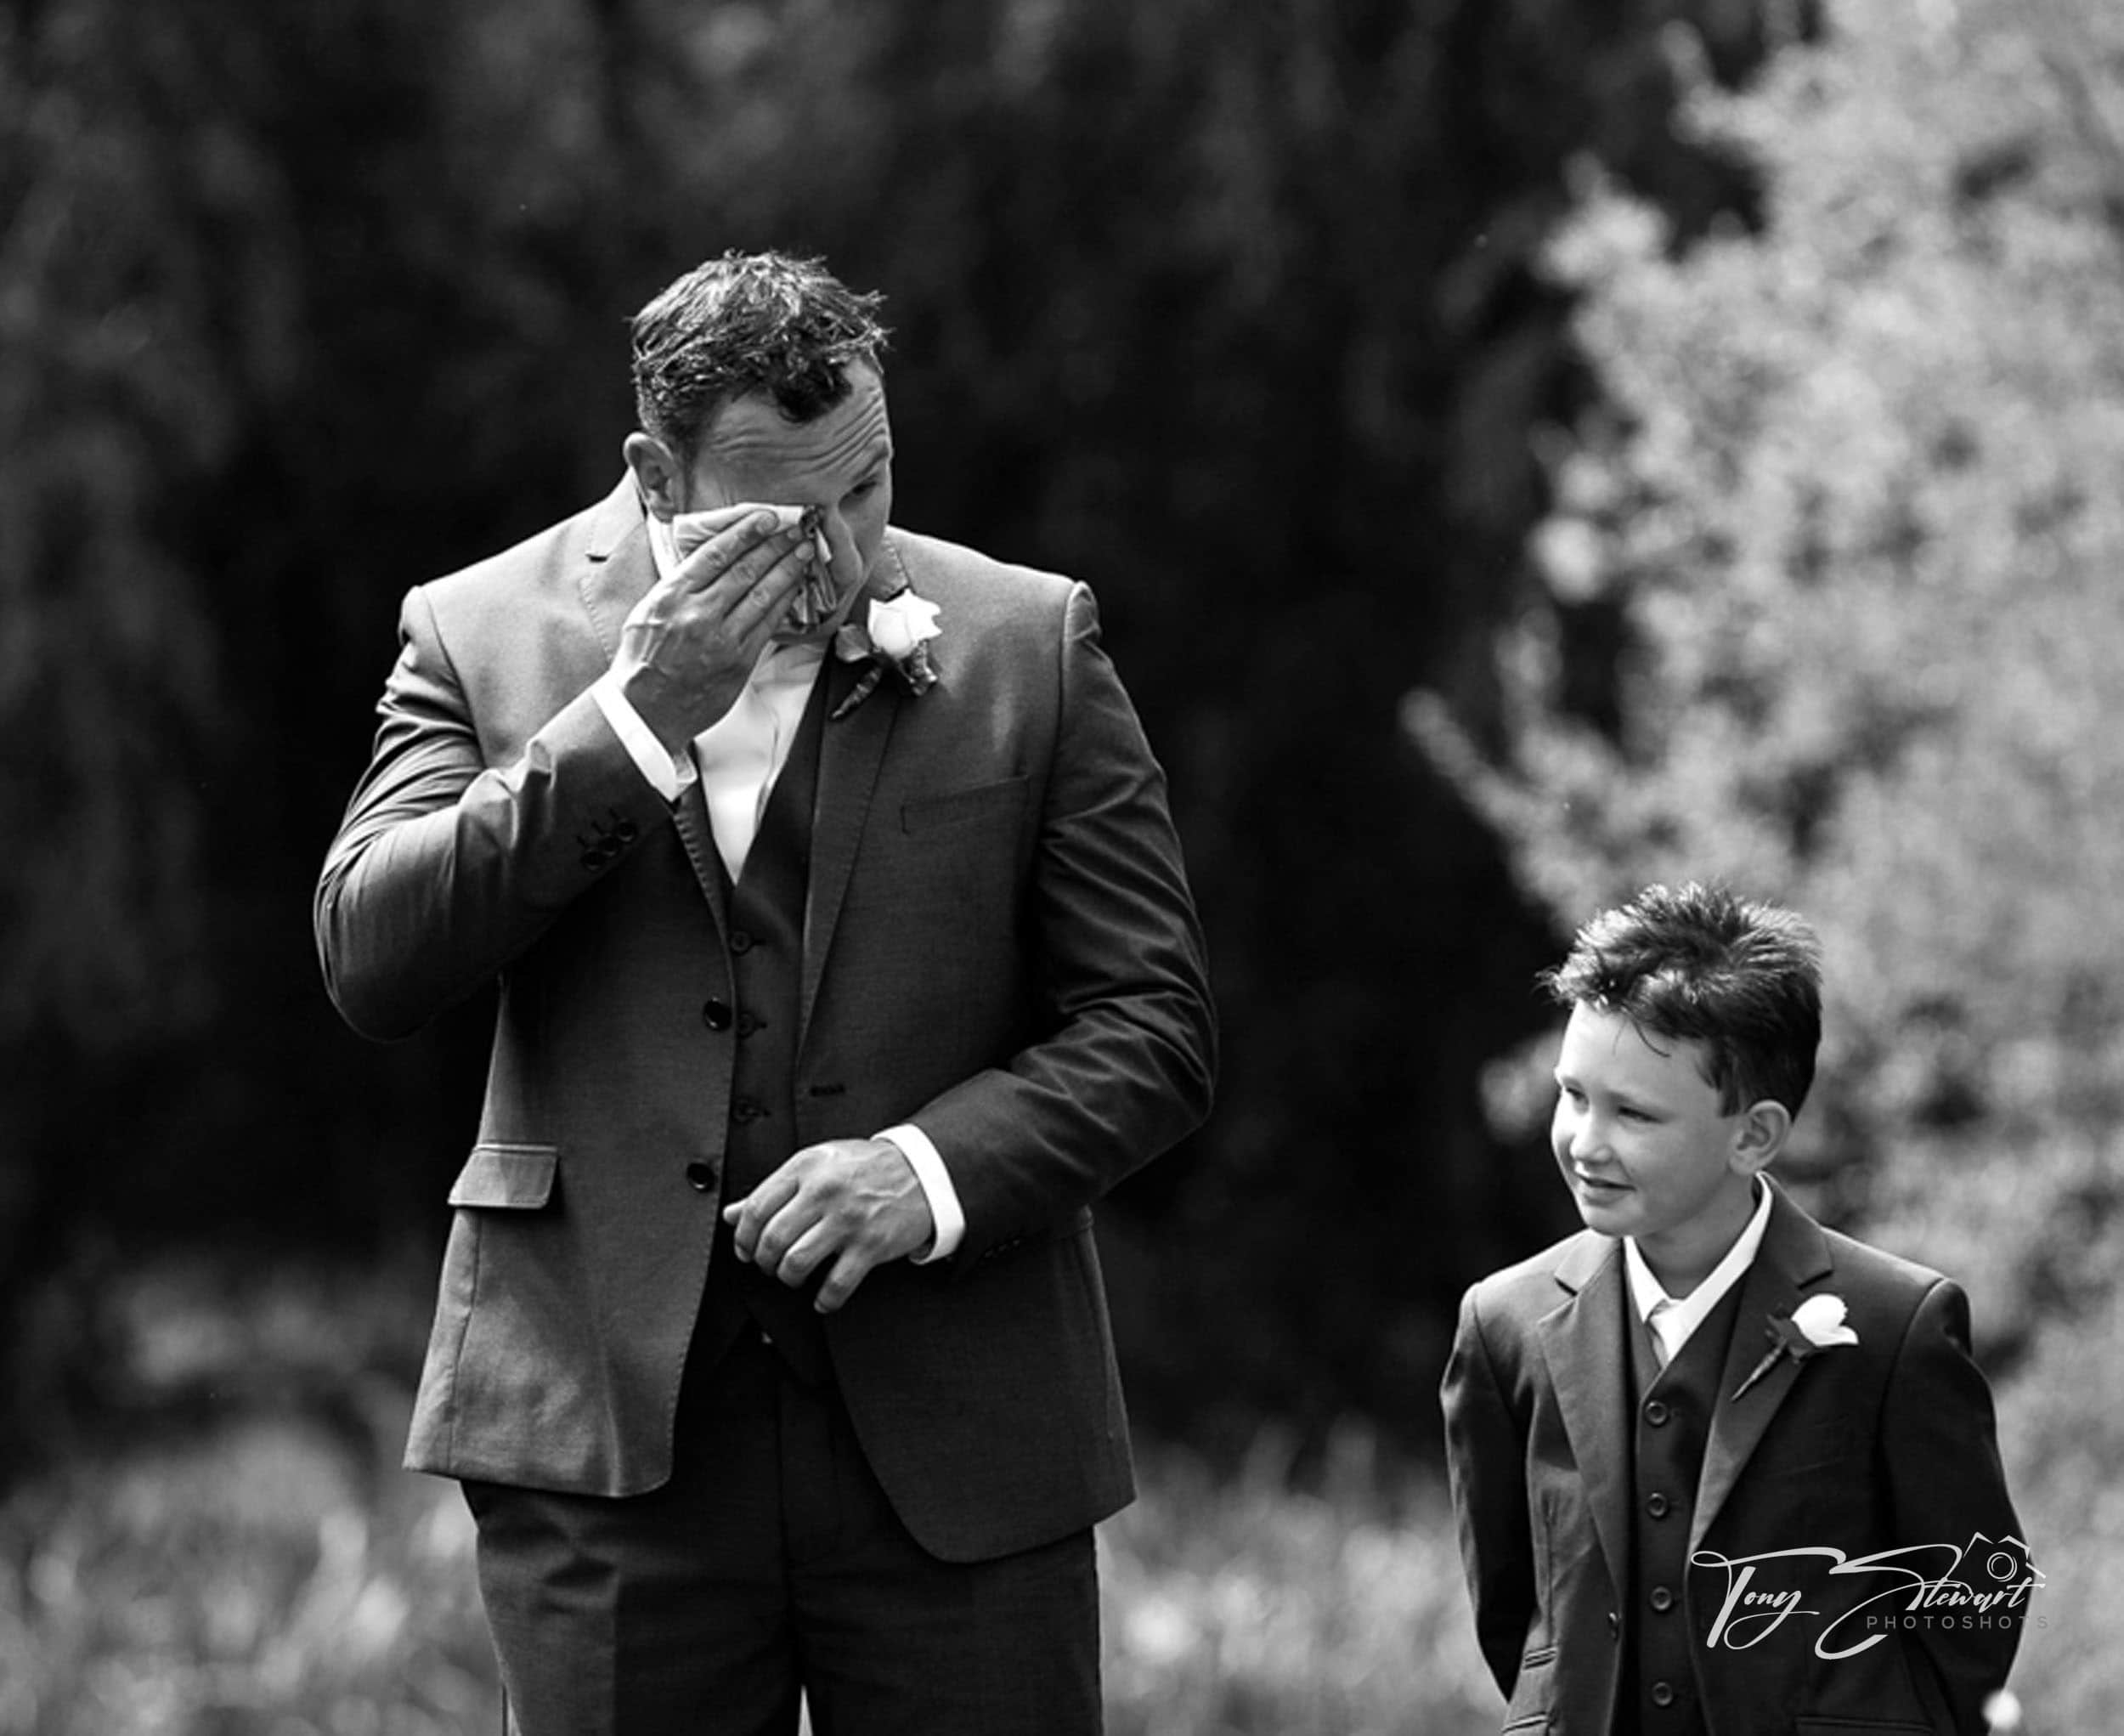 Groom wipes tears during emotional service.